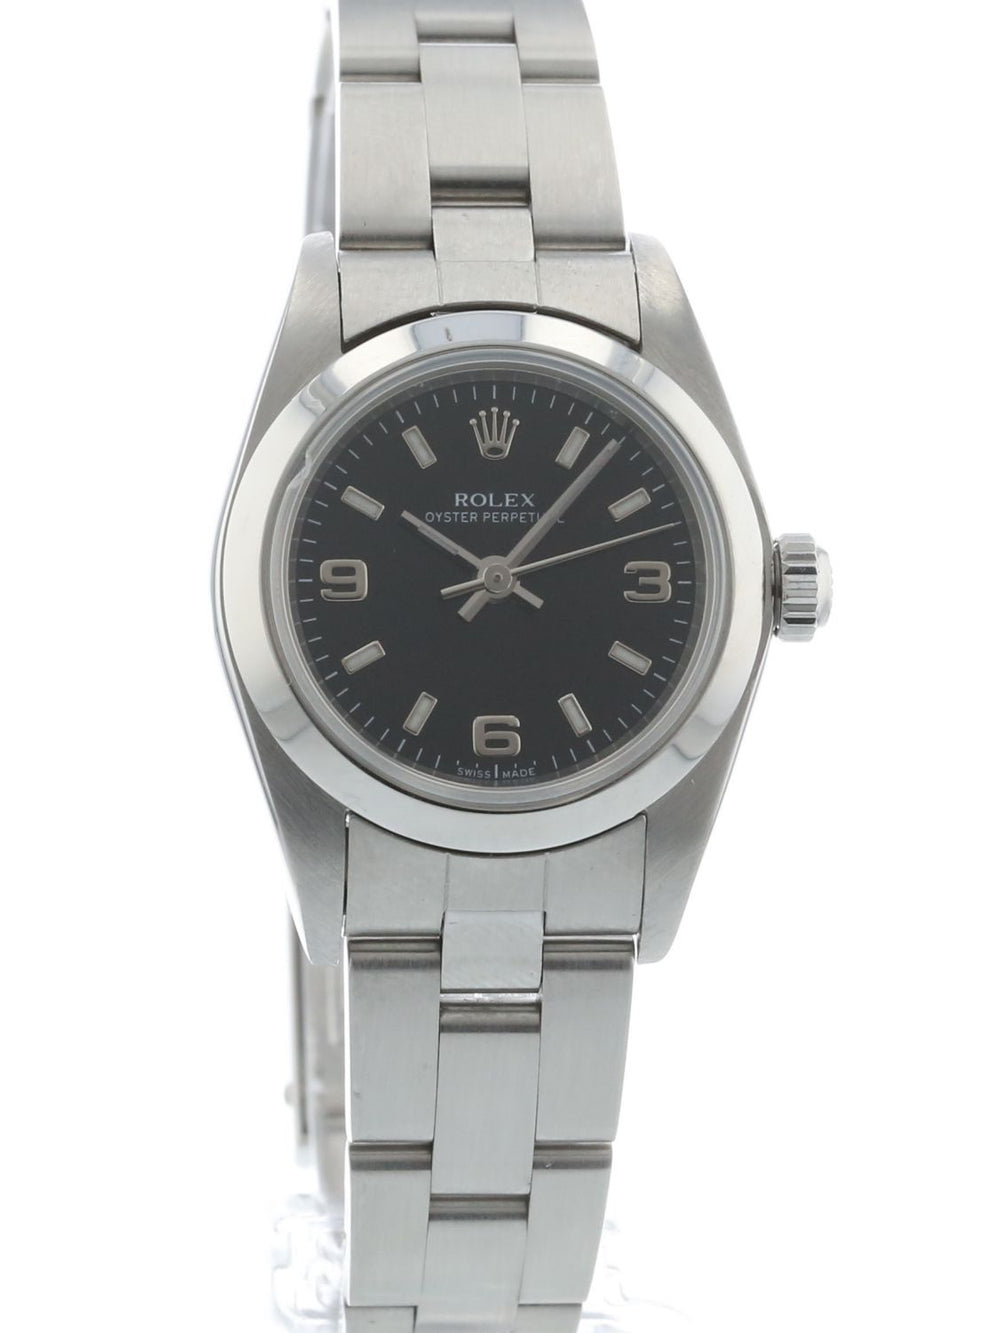 Rolex Oyster Perpetual 76080 1